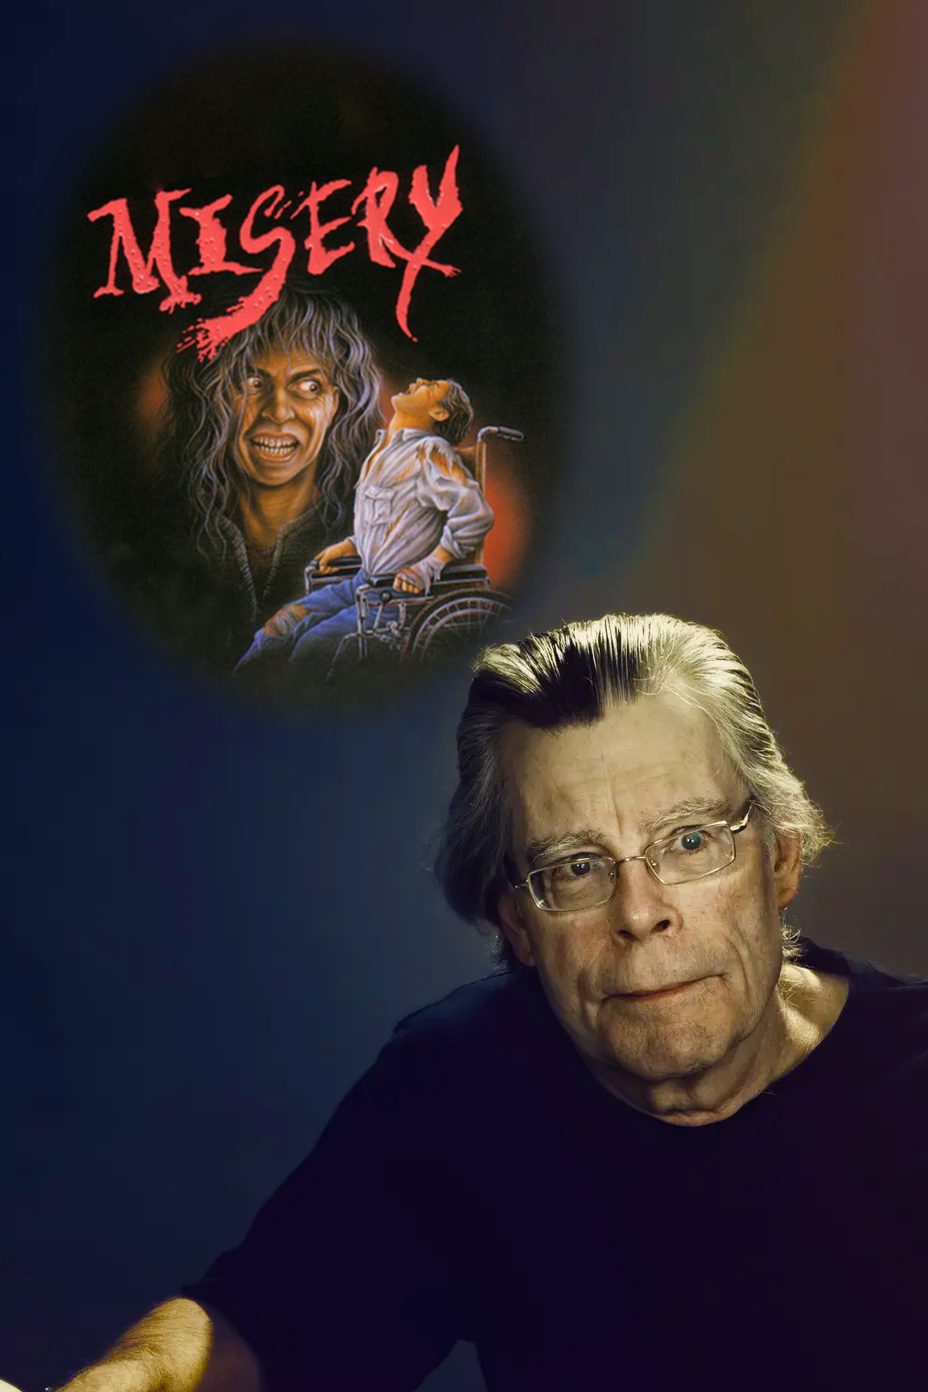 A collage of Stephen King and the cover of Misery.